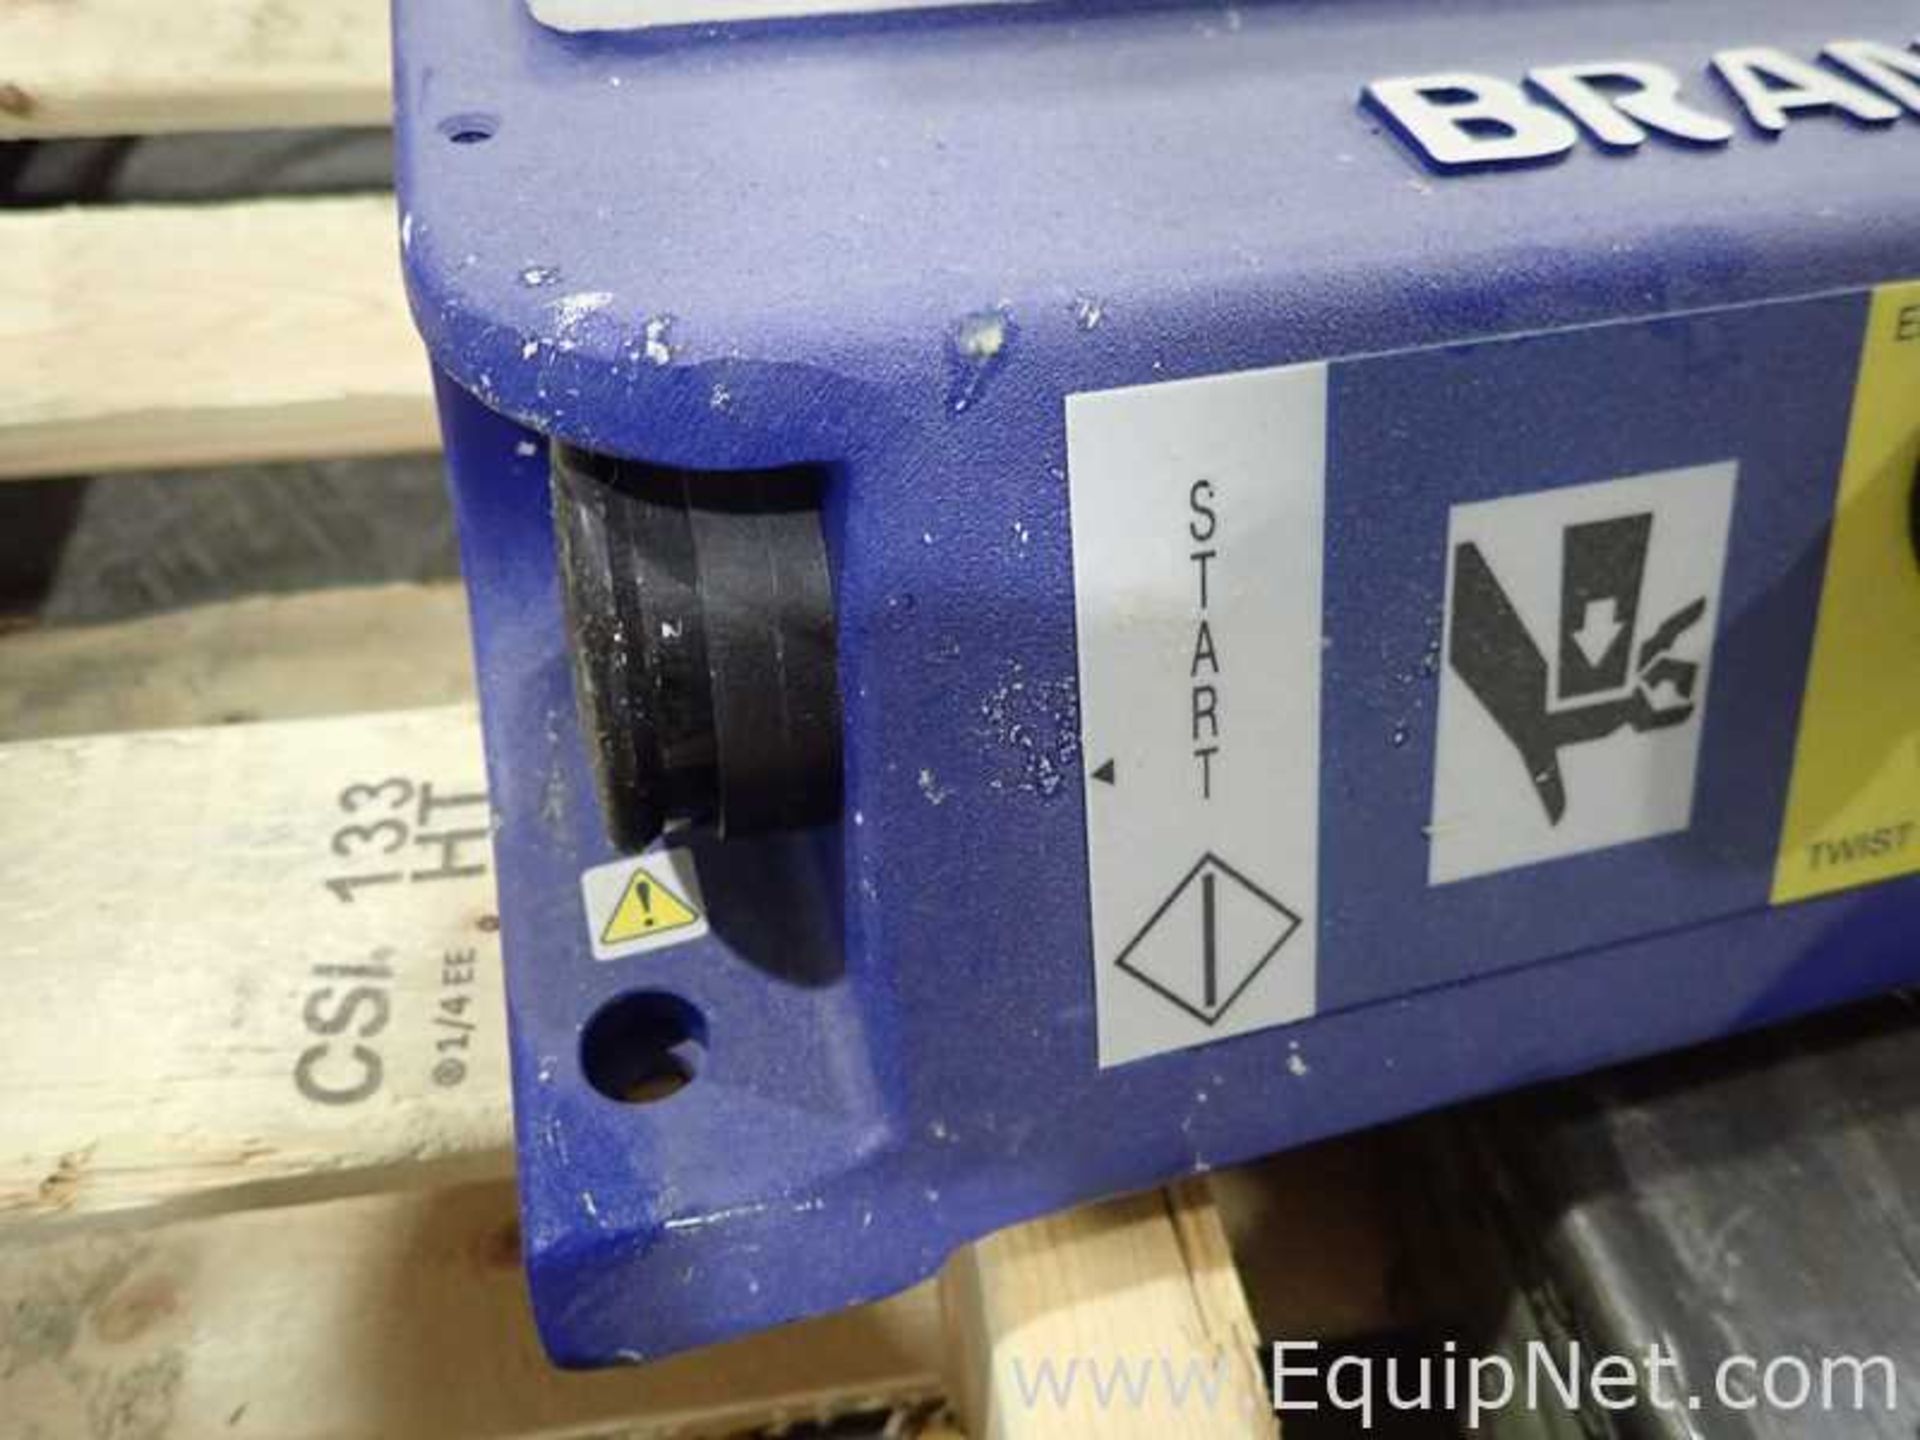 EQUIPNET LISTING #734727; REMOVAL COST: $25; DESCRIPTION: Branson Ultrasonic Welder Requires a PC - Image 3 of 7